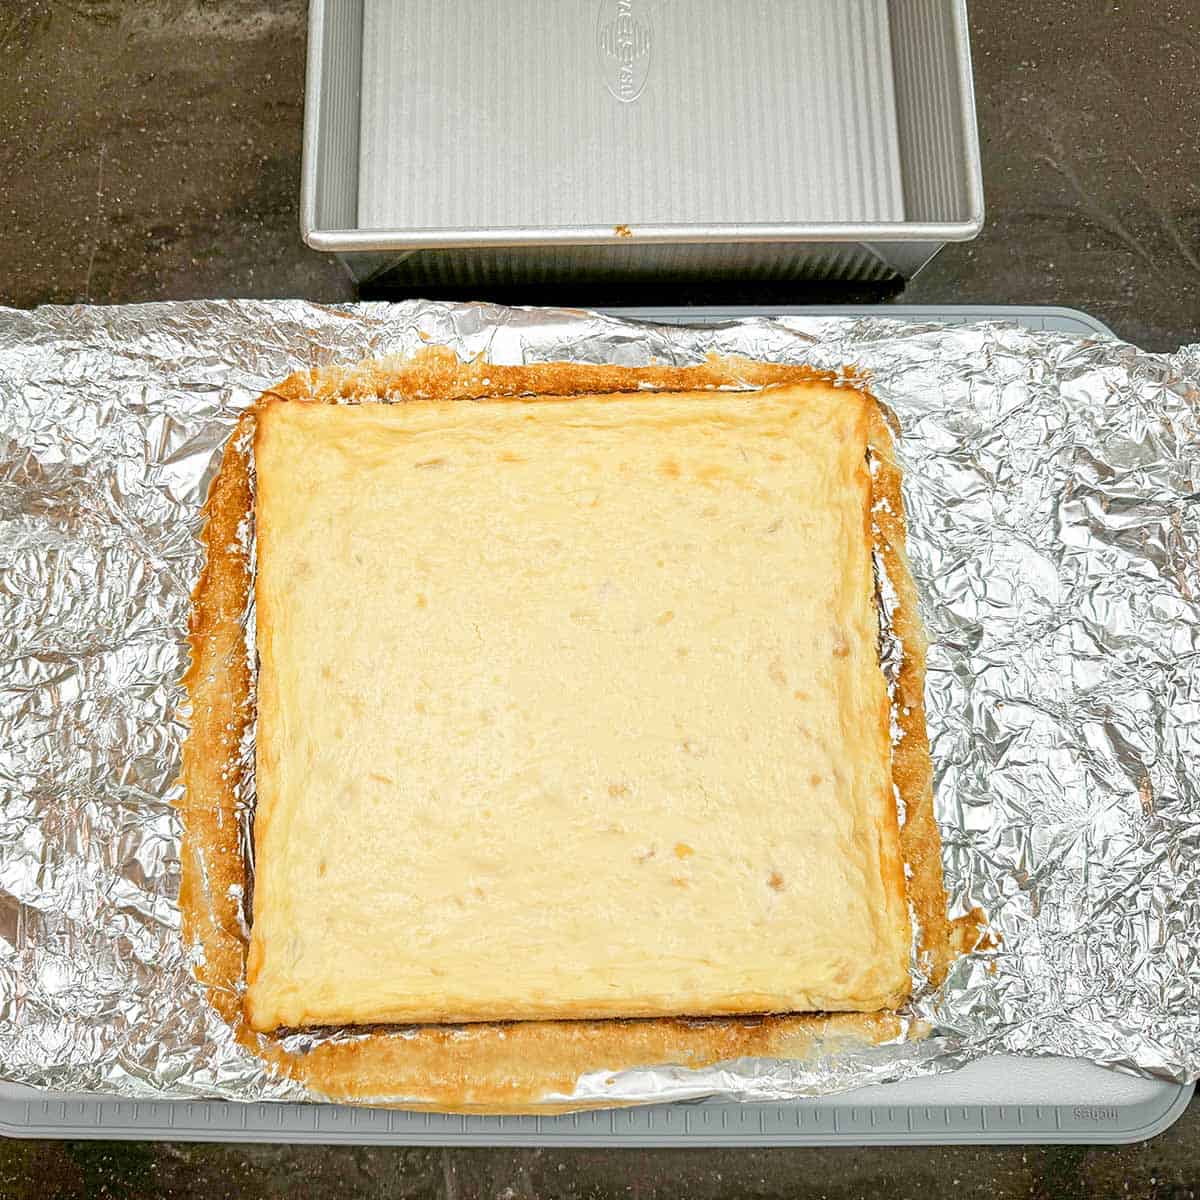 Lifted the cheesecake up by the handles and setting it on a cutting board.